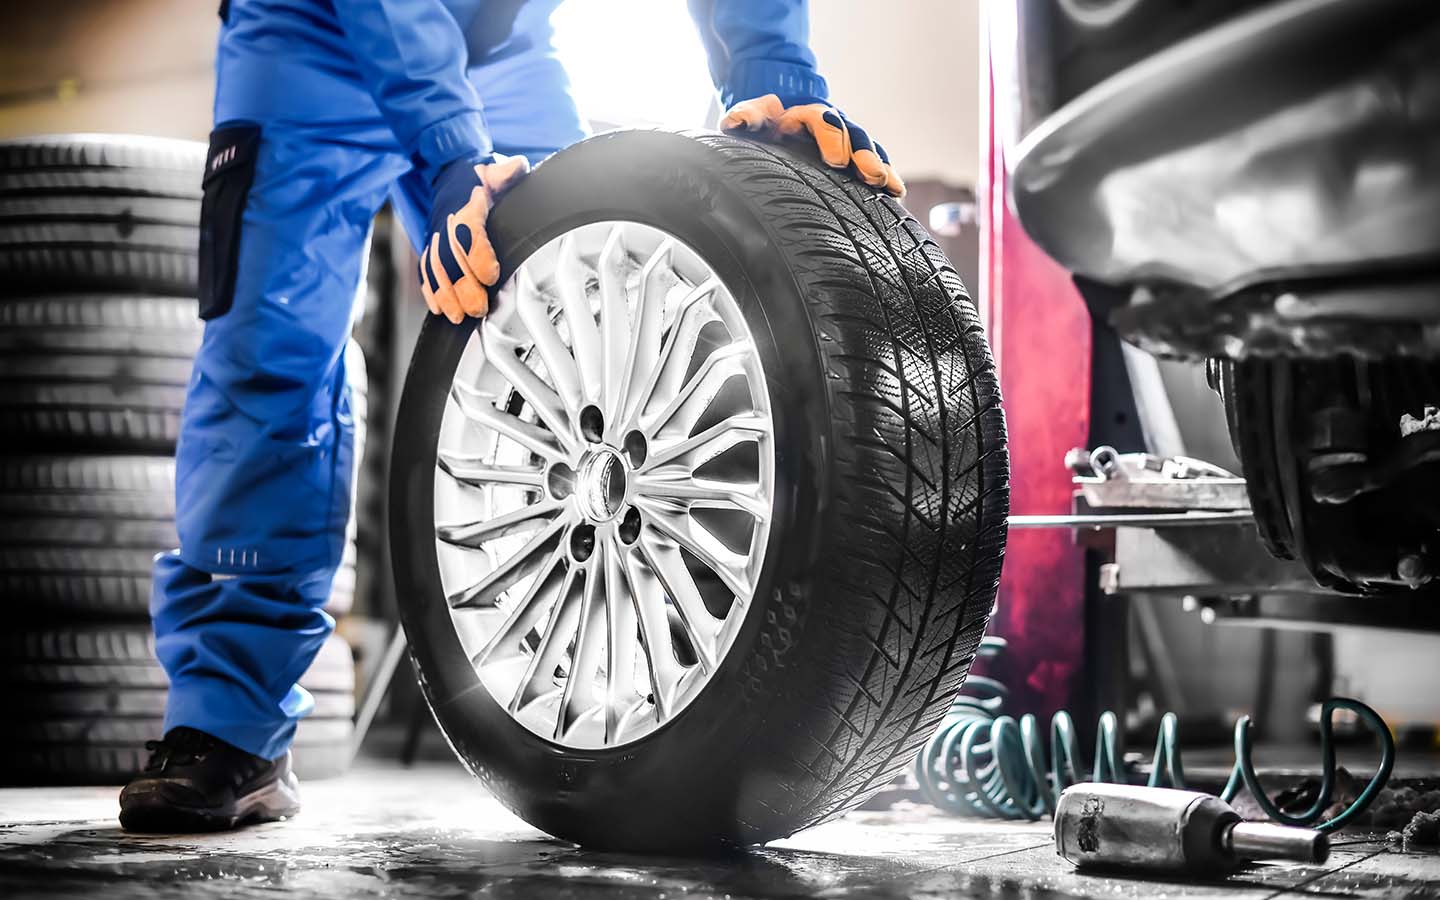 Fixing cupped tyres involves addressing the underlying issues